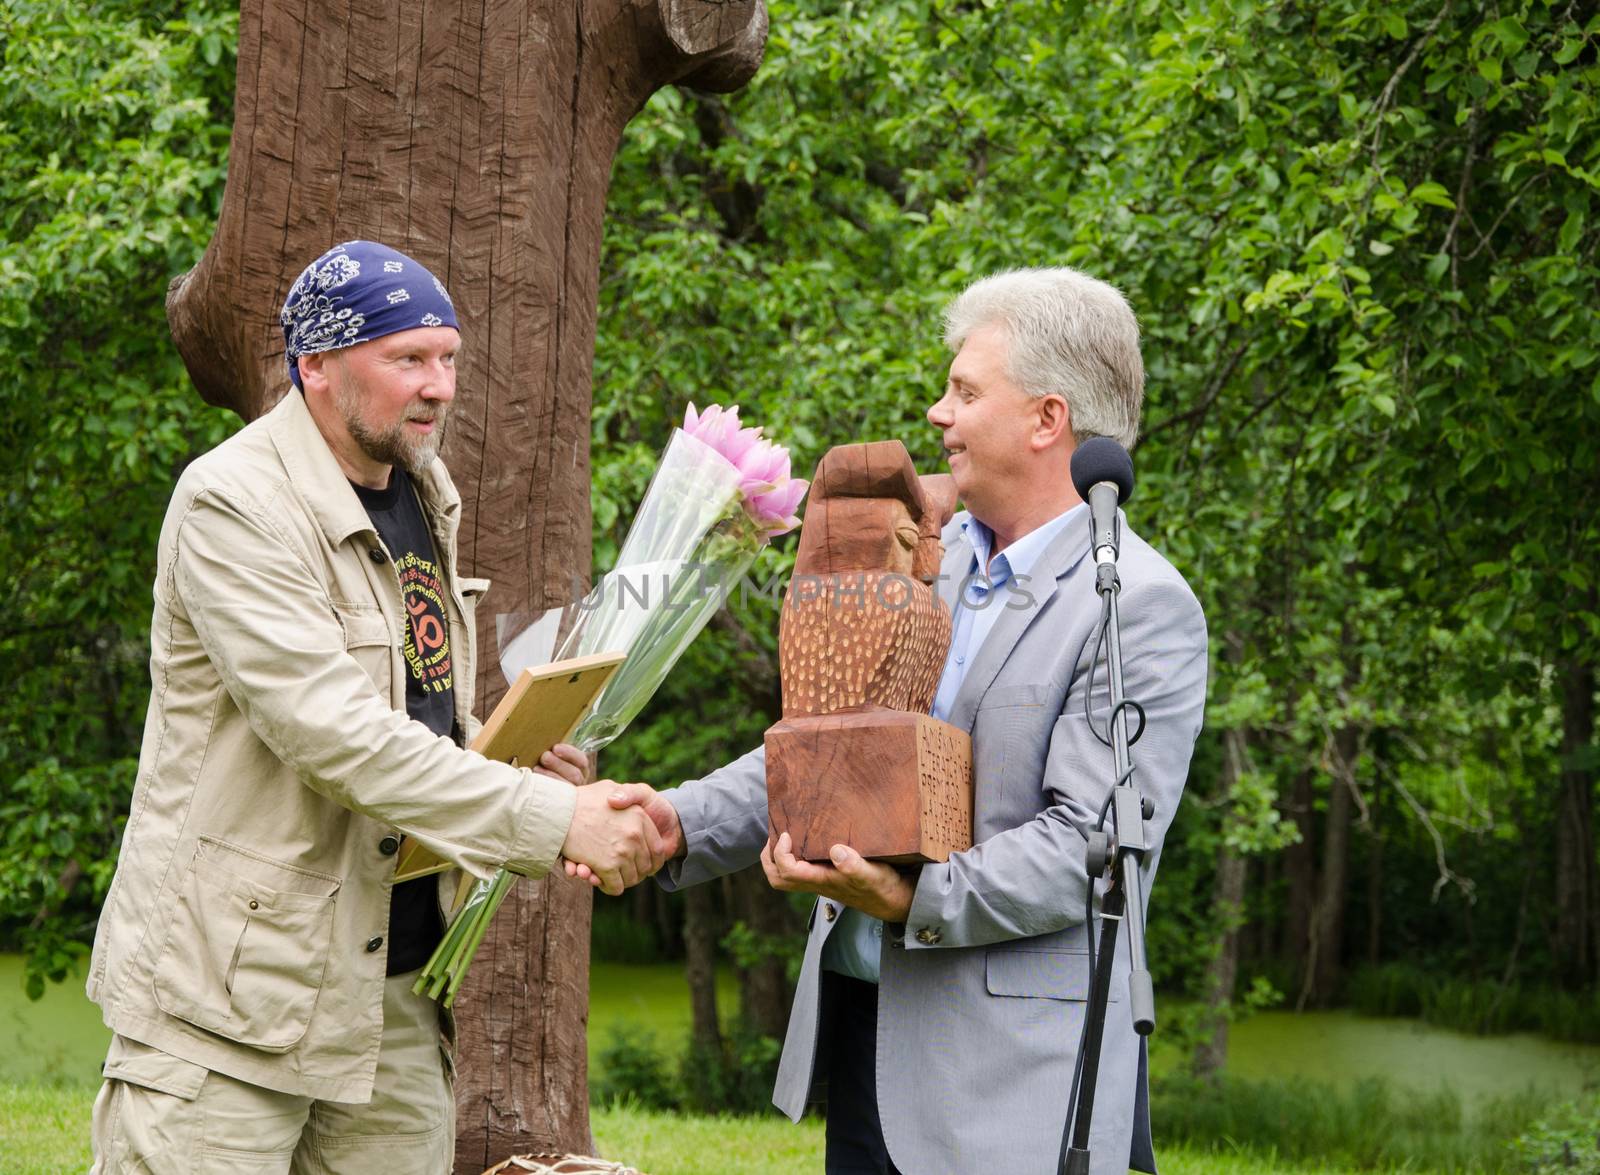 JUKNENAI, LITHUANIA - JUNE 09: presenter shake hands with prize winner and give flowers and wooden sculpture on June 09, 2013 in Juknenai.